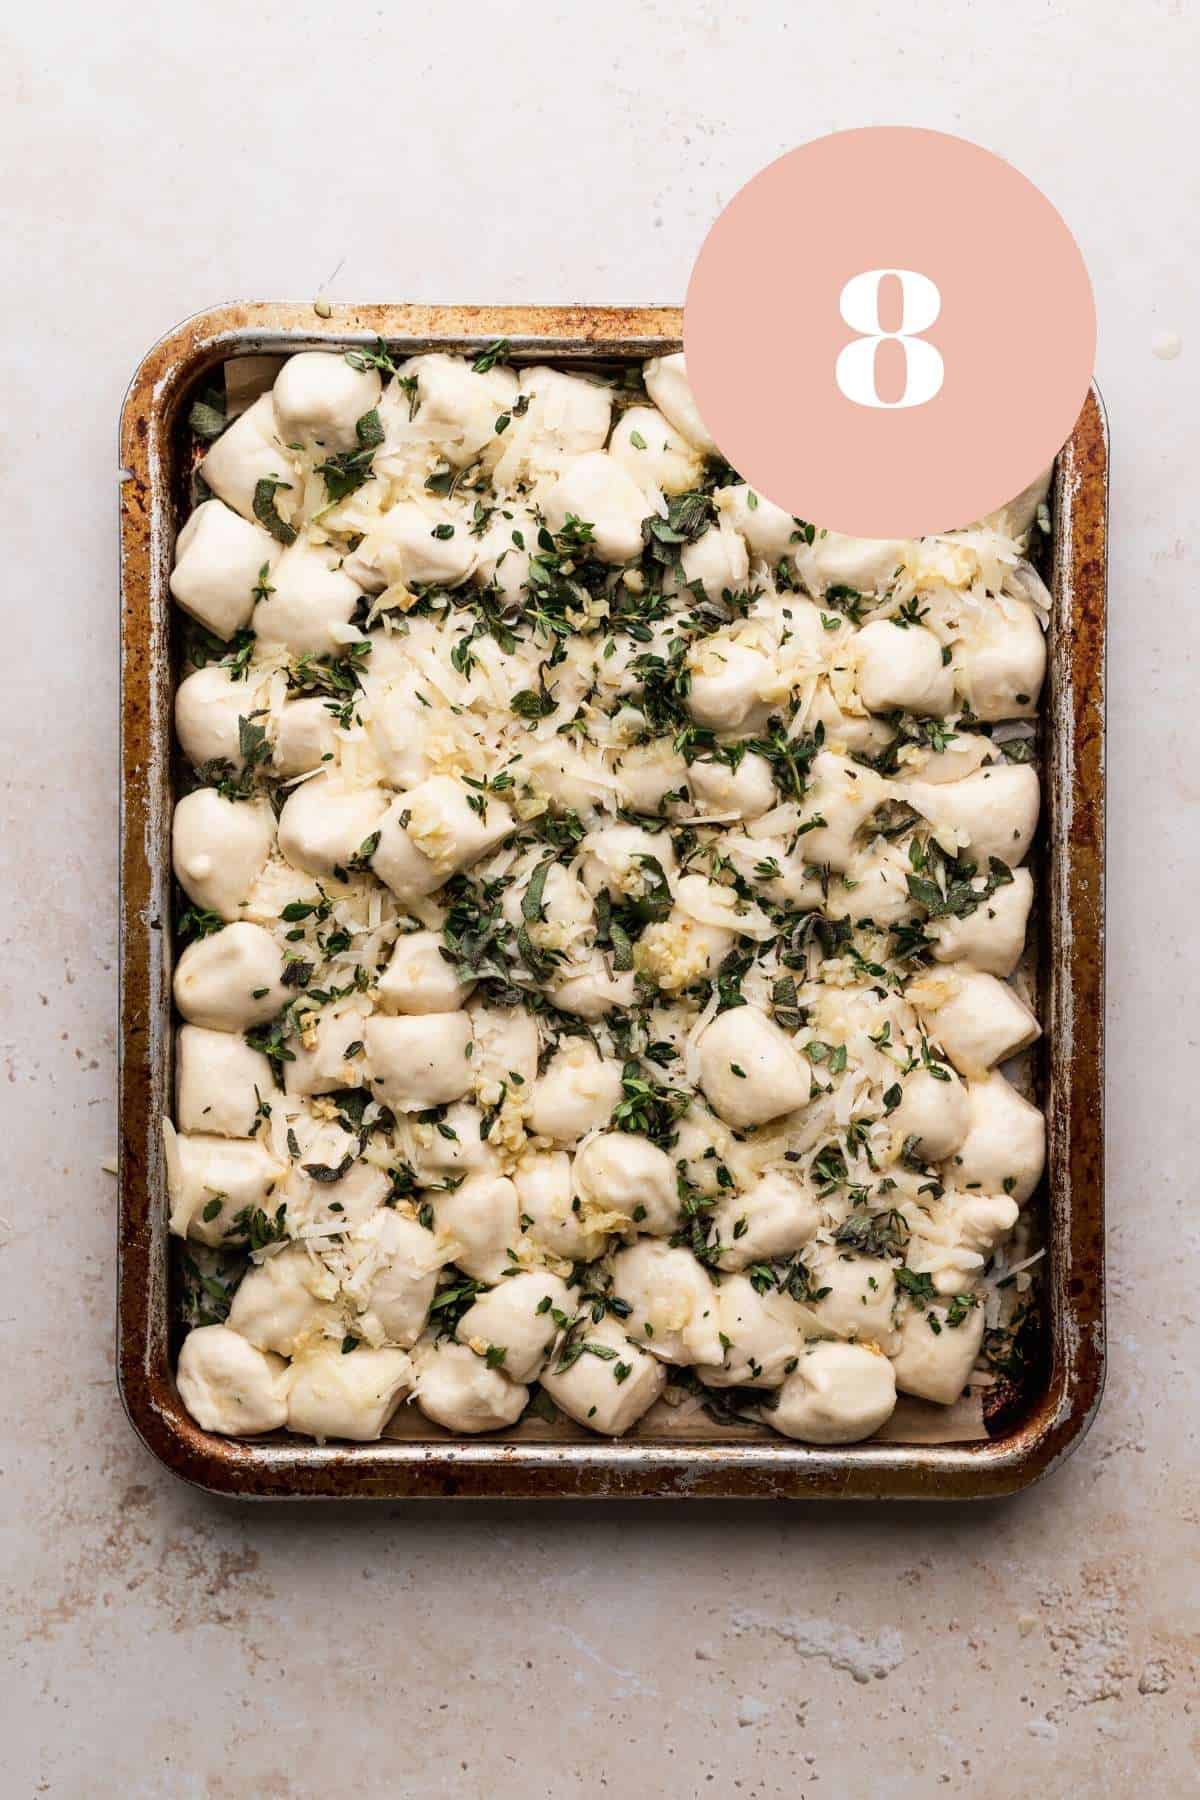 parmesan bread bites topped with garlic butter before baking.